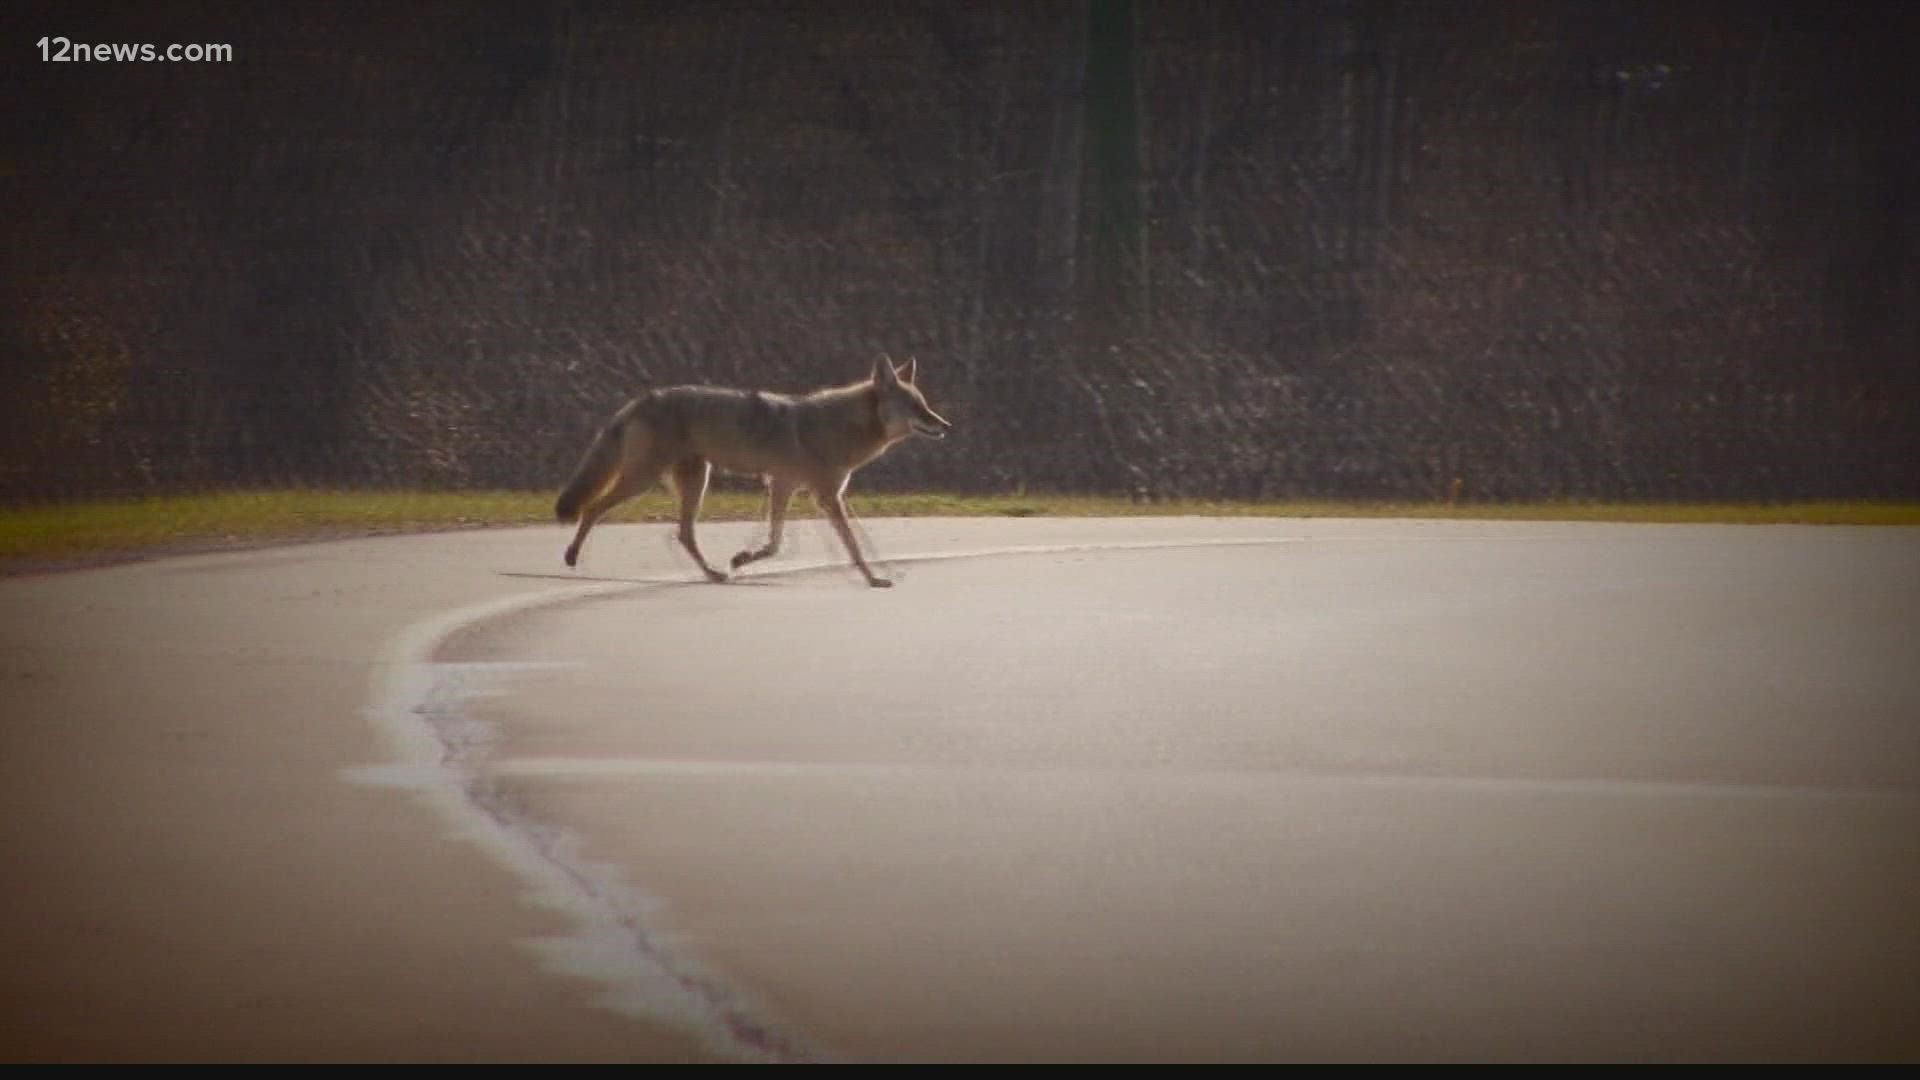 Police in Prescott are warning people who line in one neighborhood to keep their eyes out for coyotes. This comes after two women reported being bitten by coyotes.